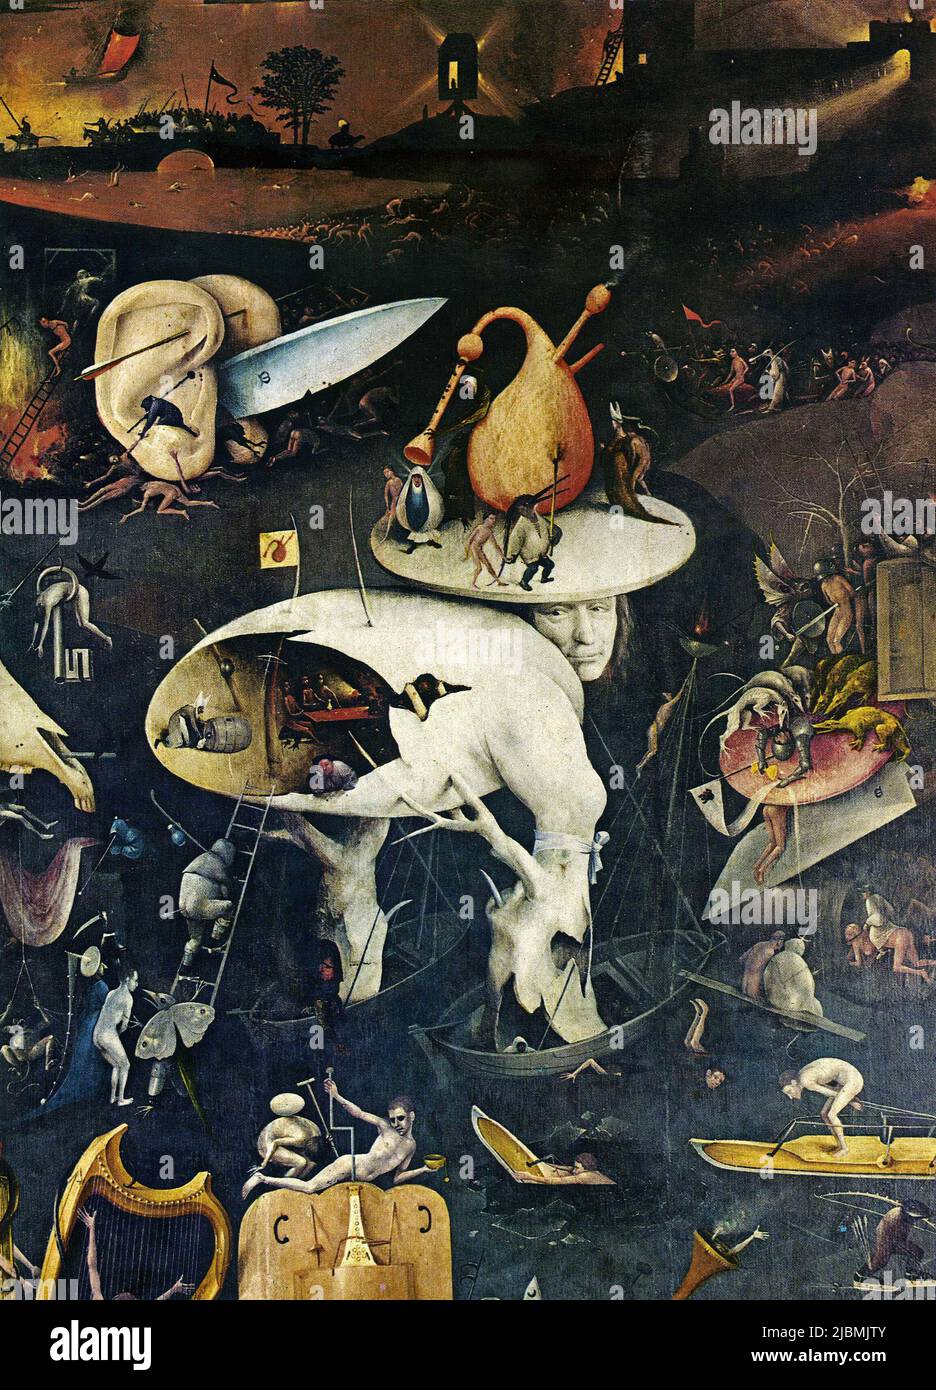 'Hell', 'The Garden of Earthly Delights'. Detail from the Right wing of the triptych. Painting by Hieronymus Bosch. Madrid, Prado. Stock Photo